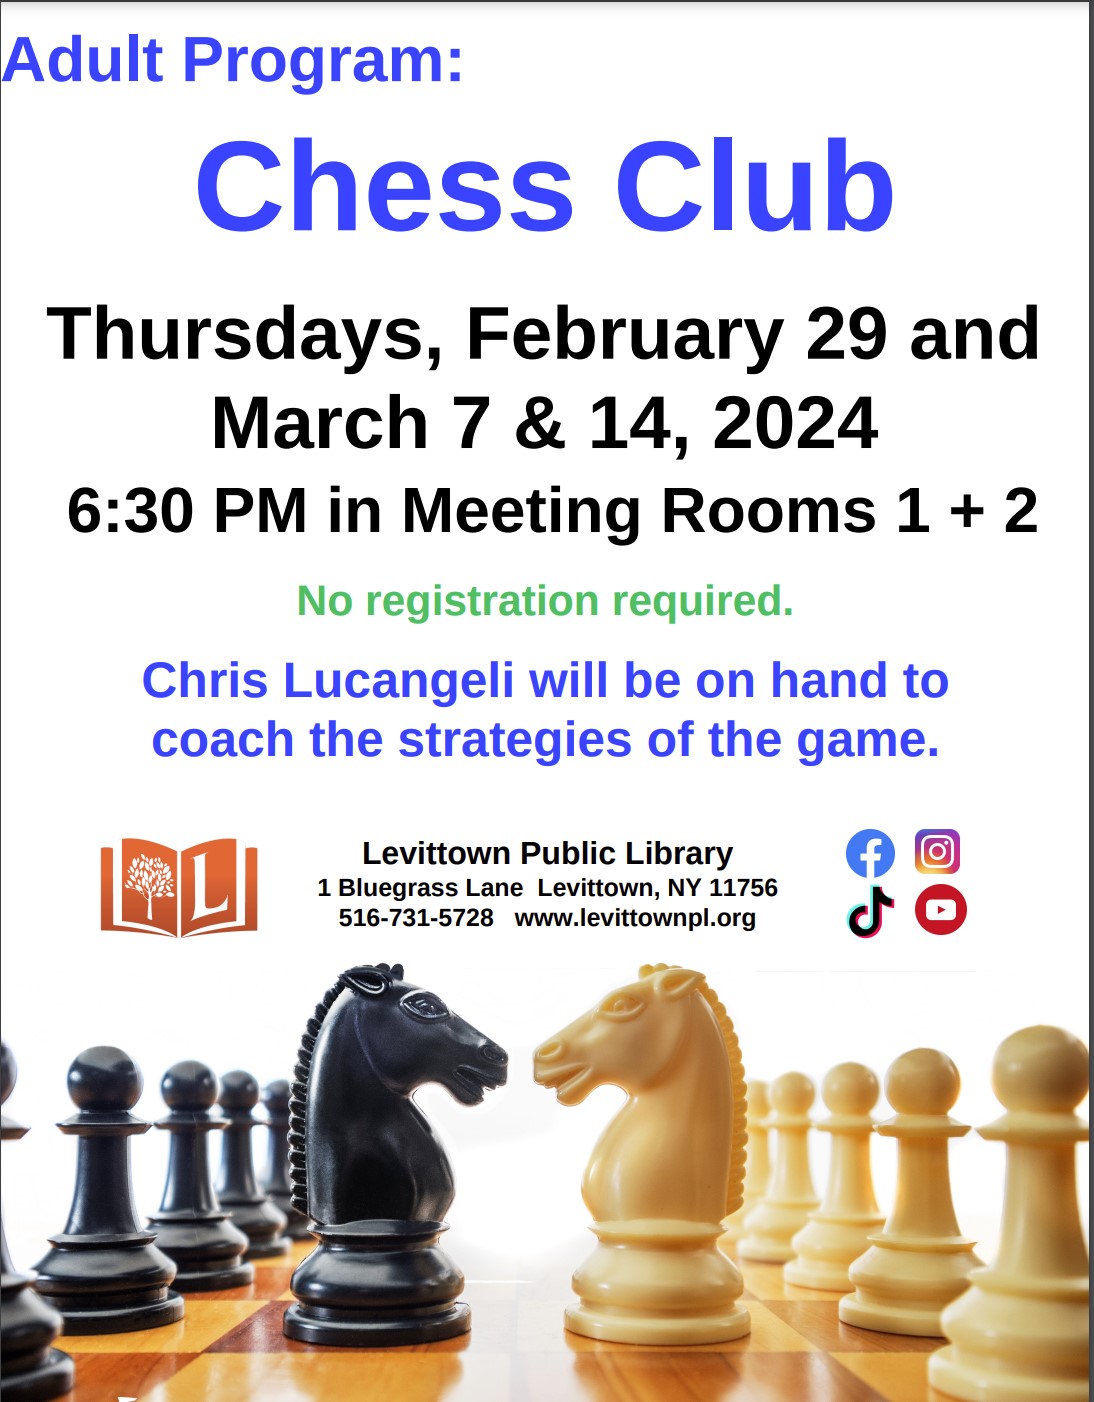 Have Fun and make some new Friends! Learn to Play Chess at the Levittown Library!